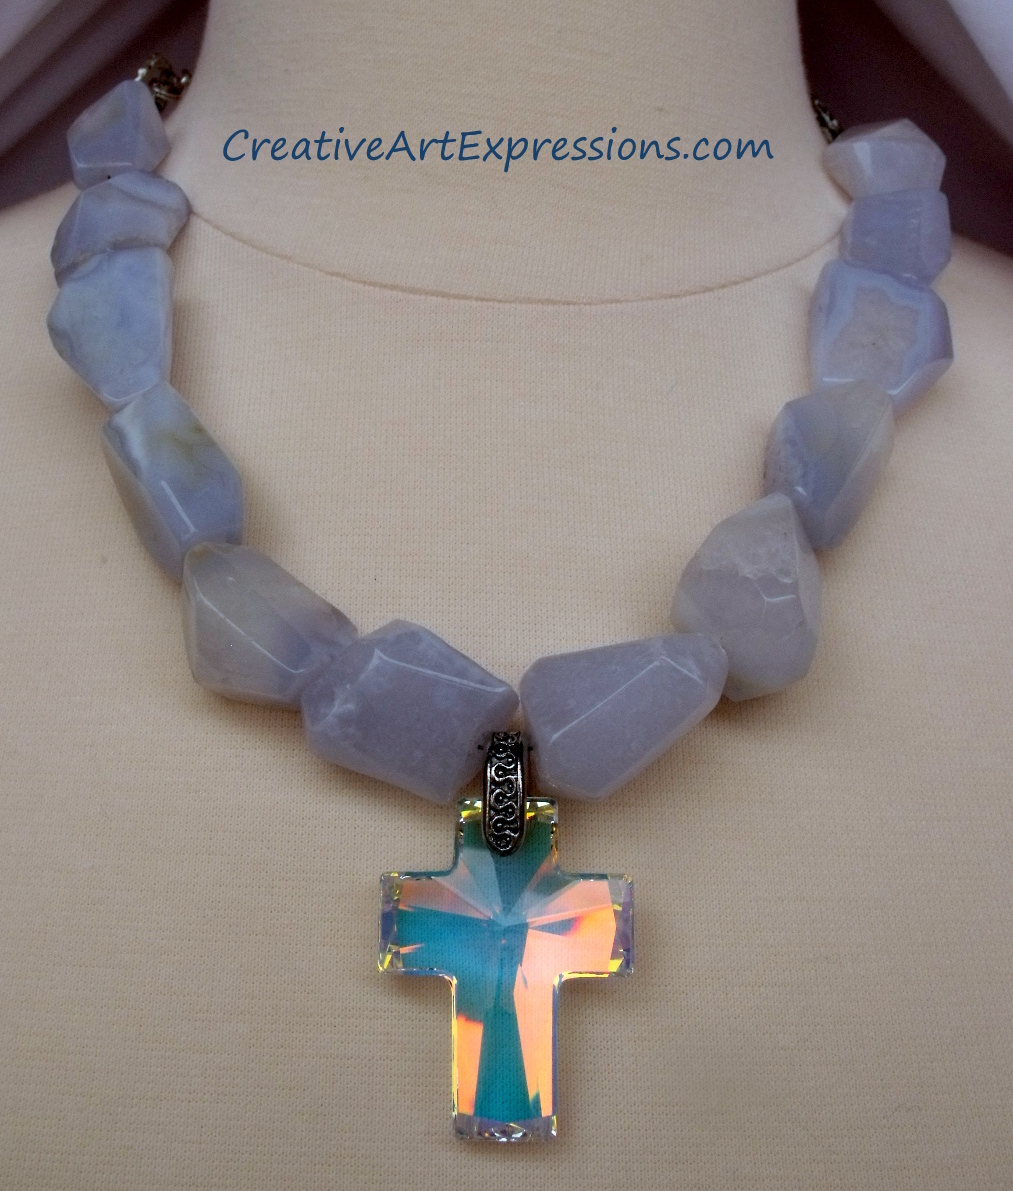 Creative Art Expressions Handmade Lace Agate & Crystal Cross Necklace Jewelry Design